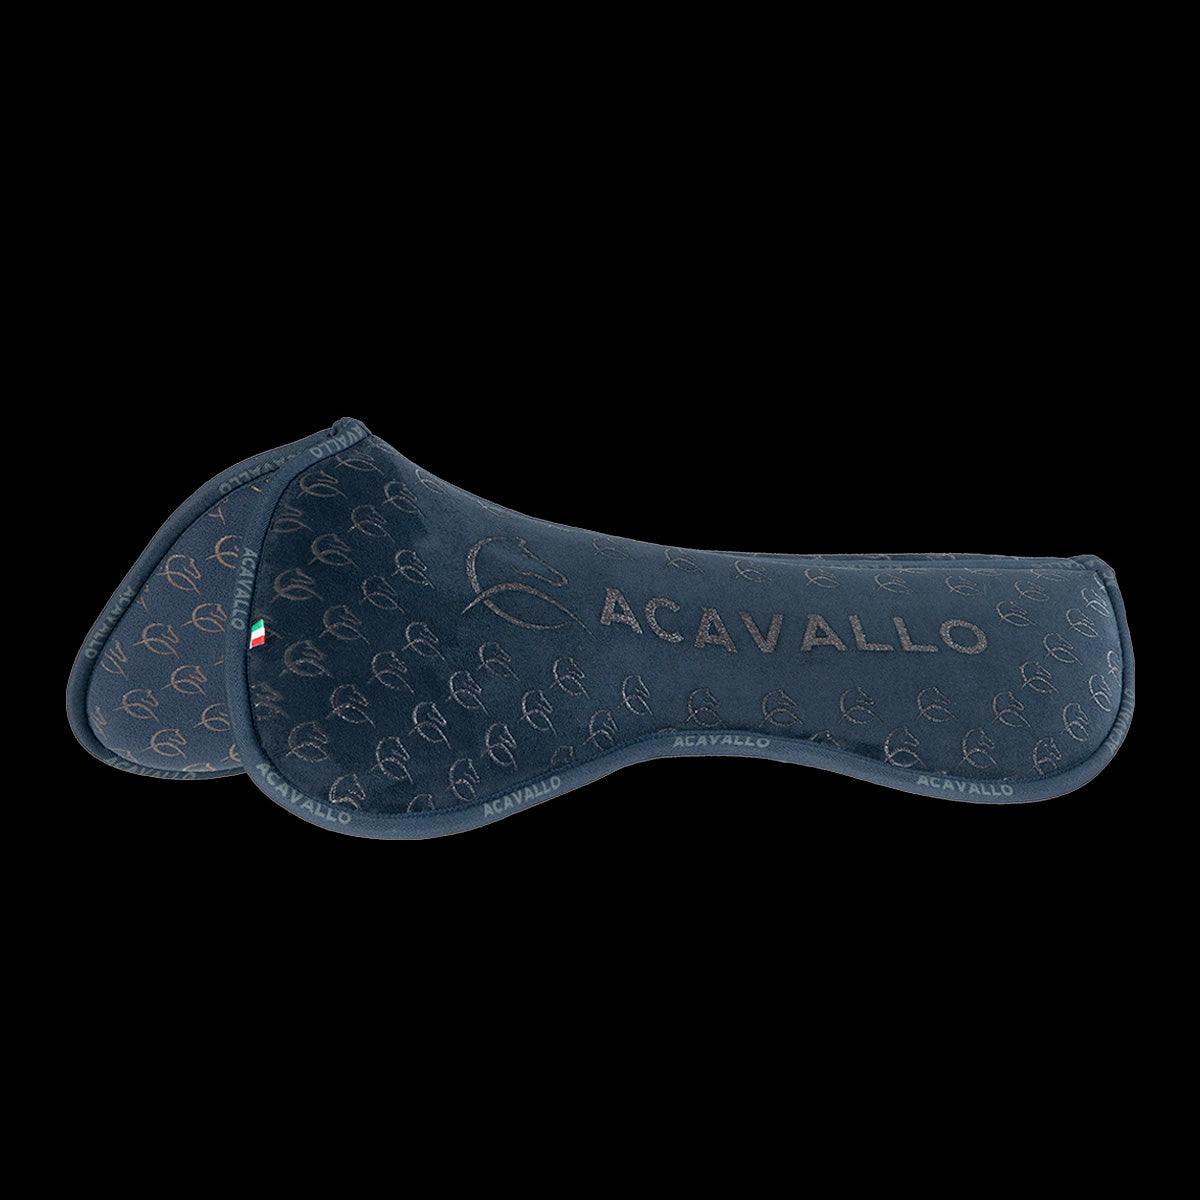 Acavallo Spine Free C.C. & Memory Foam ½ Pad, Double Silicon Grip System